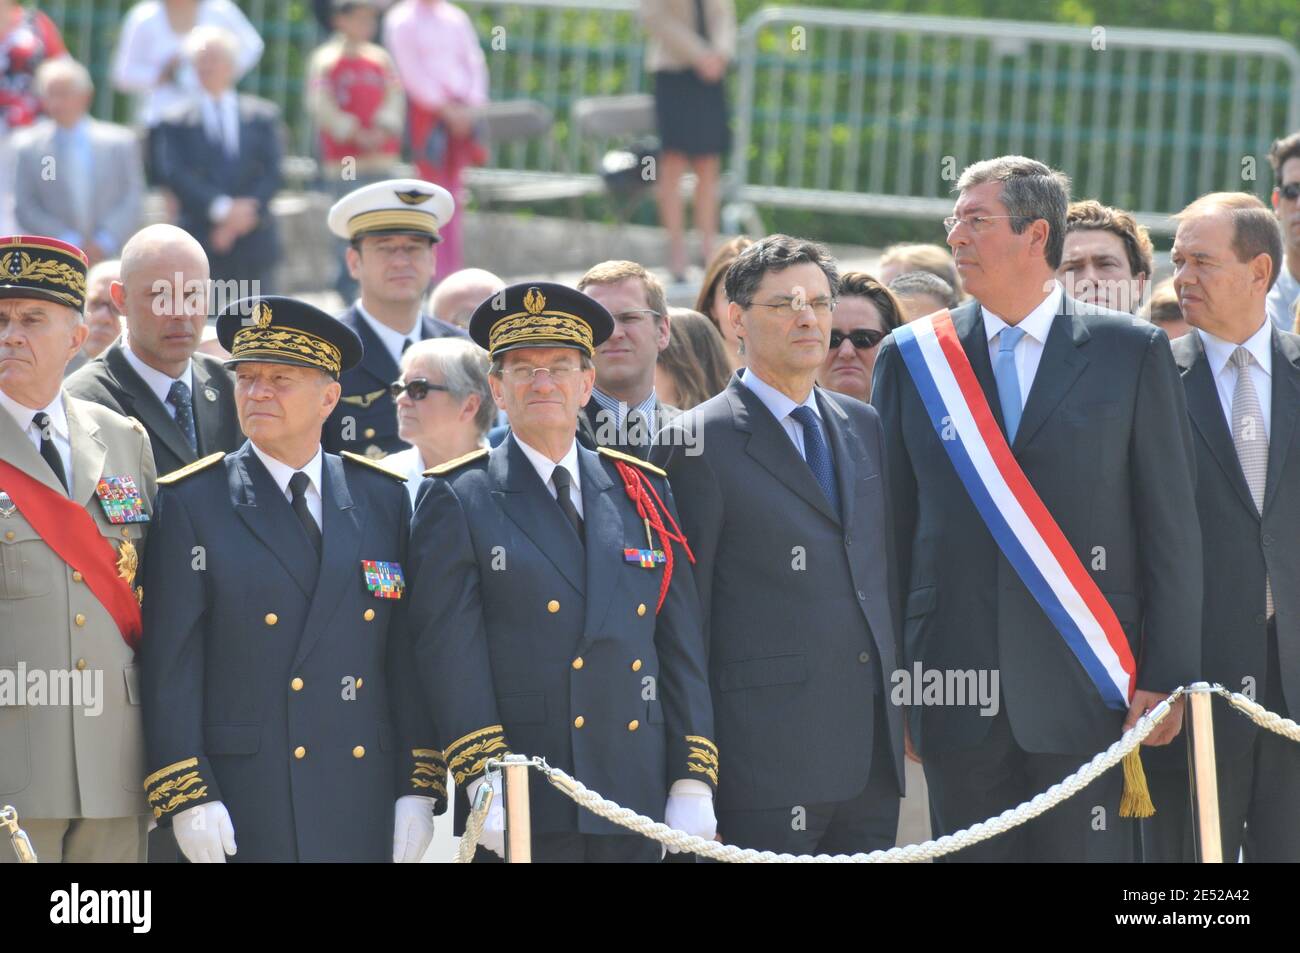 Pierre Mutz, Michel Gaudin, Patrick Devedjian, Patrick Balkany and Patrick Ollier during the ceremony marking the 68th anniversary of 'The Appeal of June 18' at the Mont-Valerien in Suresnes, near Paris, France on June 18, 2008. The commemorations took place where German authorities executed, 15 December 1941, more than 70 people at Mont-Valerien in response to a French attack on a German officer. Photo by Ammar Abd Rabbo/ABACAPRESS.COM Stock Photo